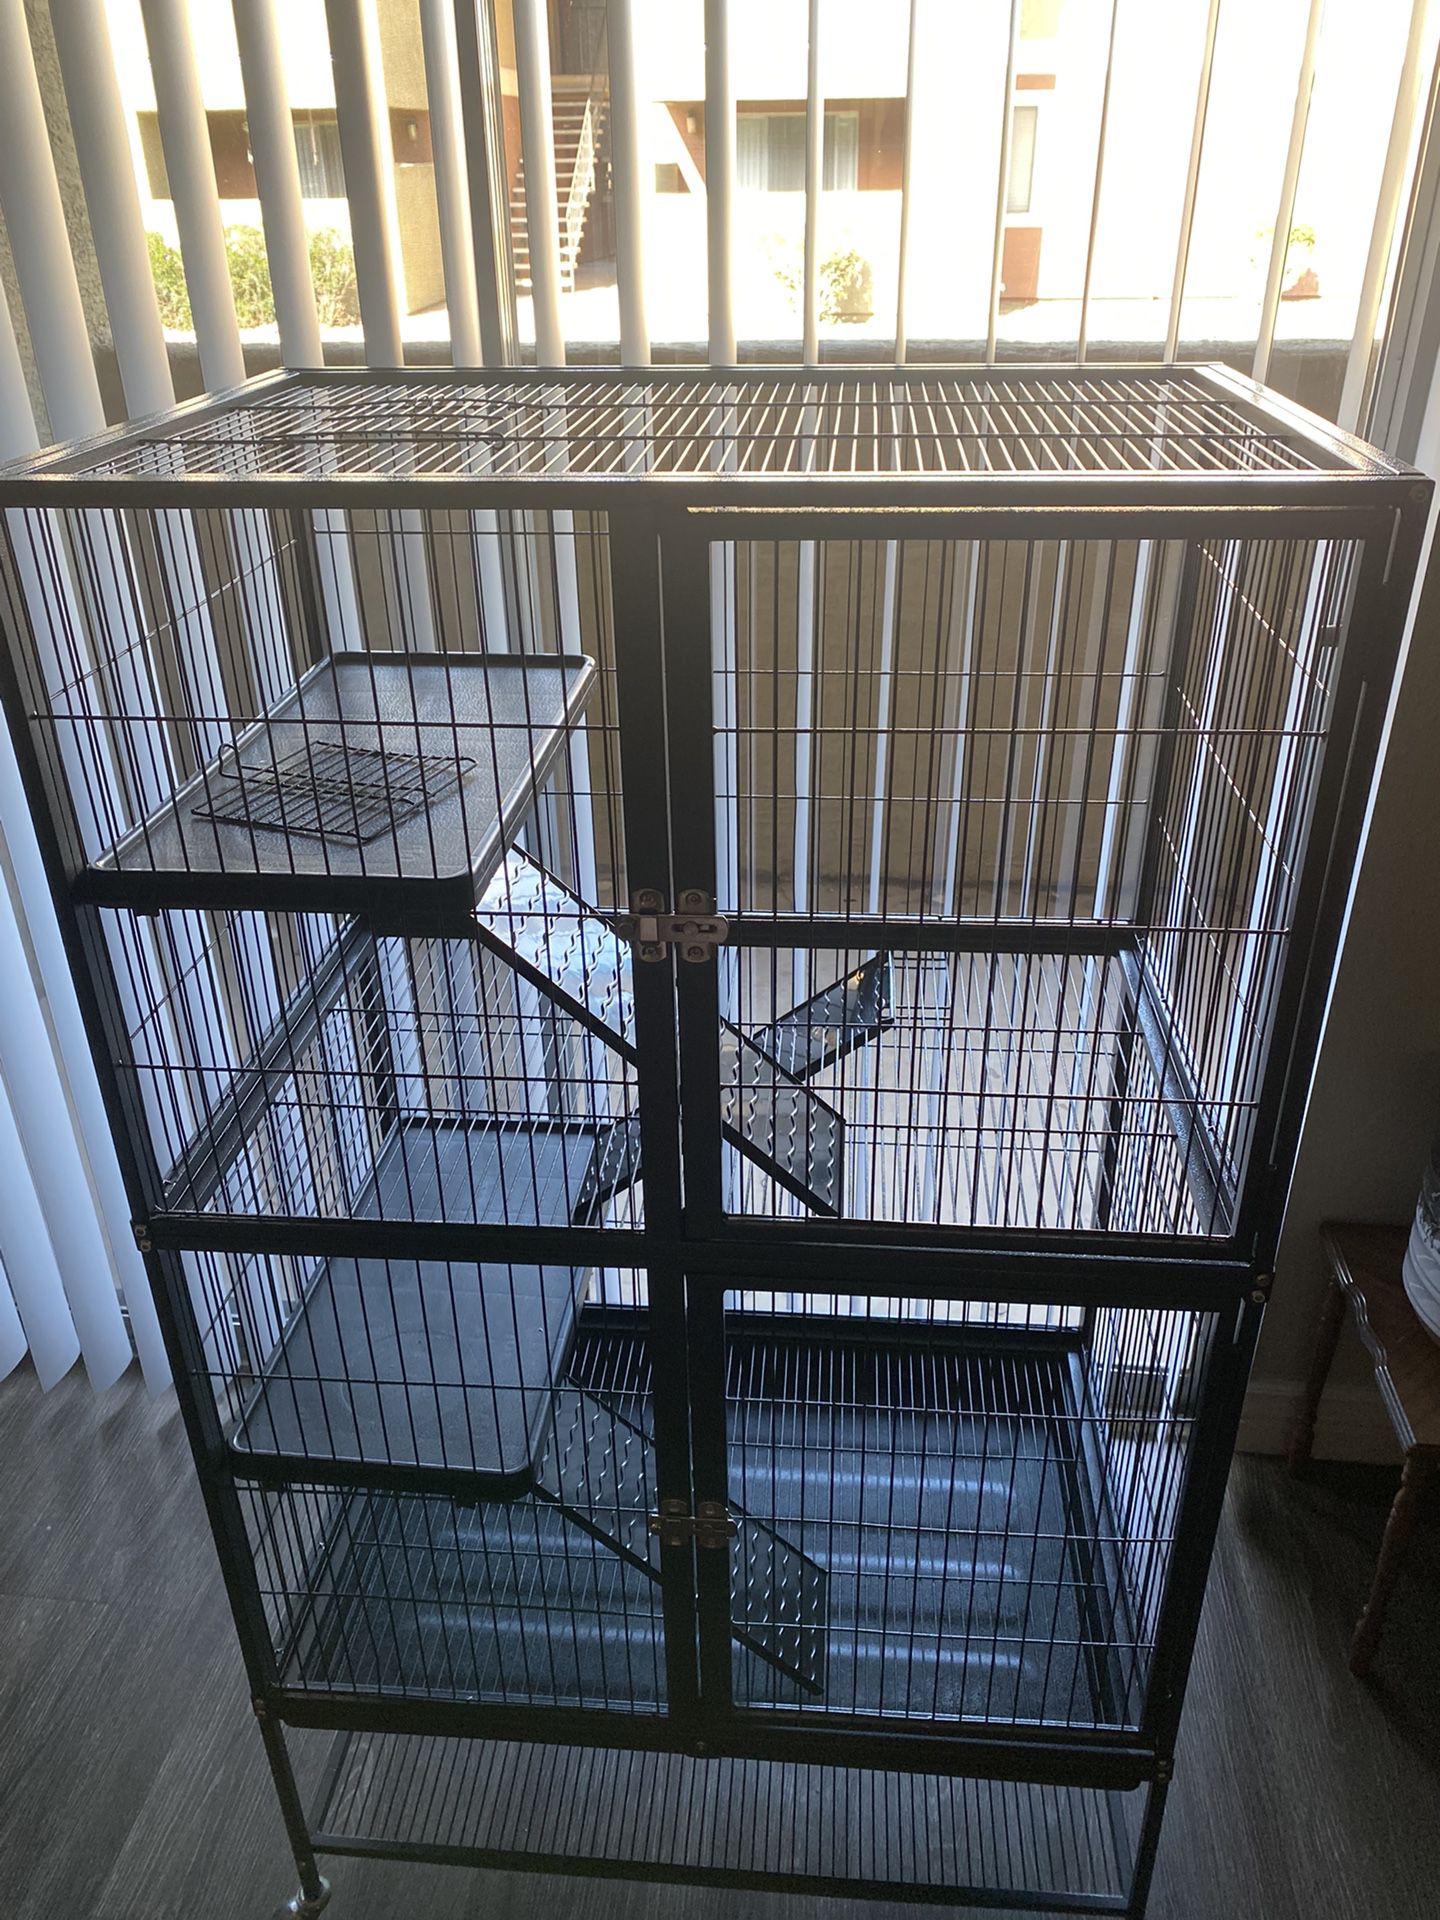 Puppy Dog Starter Kit Crate Cage Toys Treats for Sale in Peoria, AZ -  OfferUp